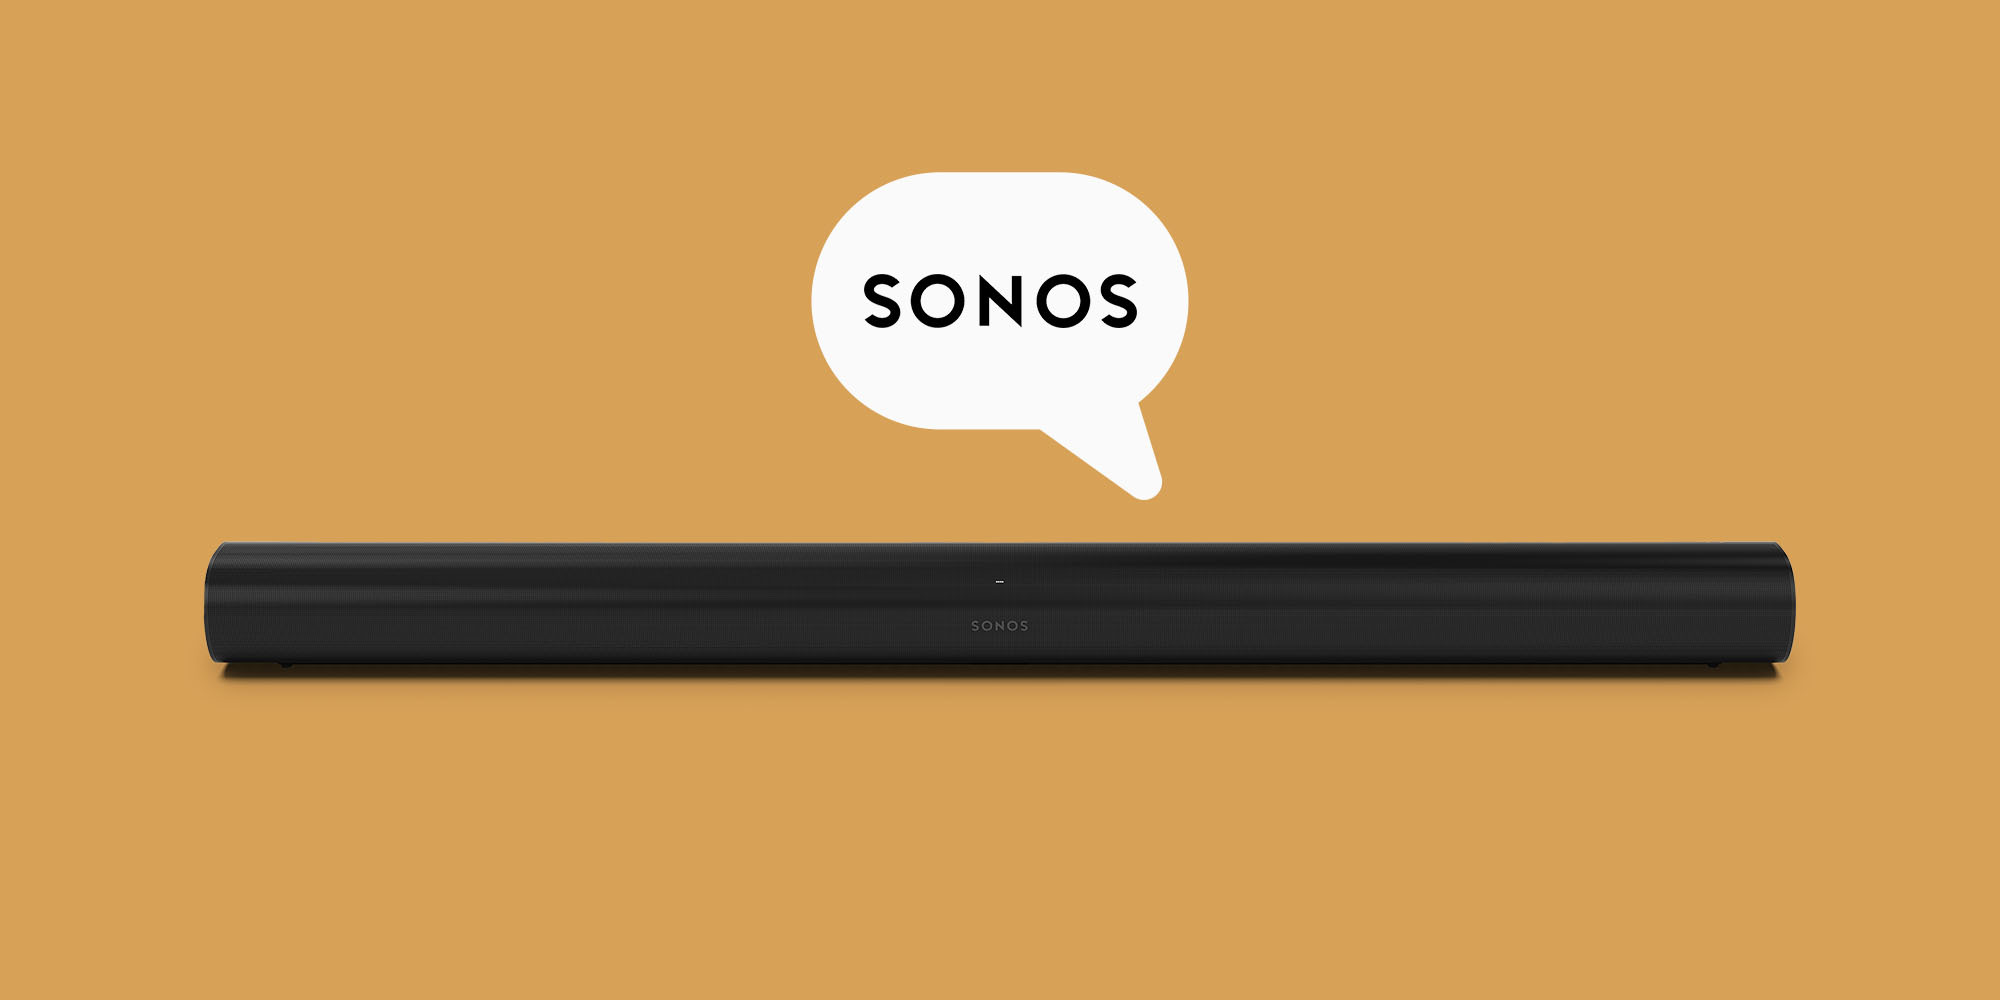 'Hey Sonos': Smart speaker is launching its own version of Siri 9to5Mac